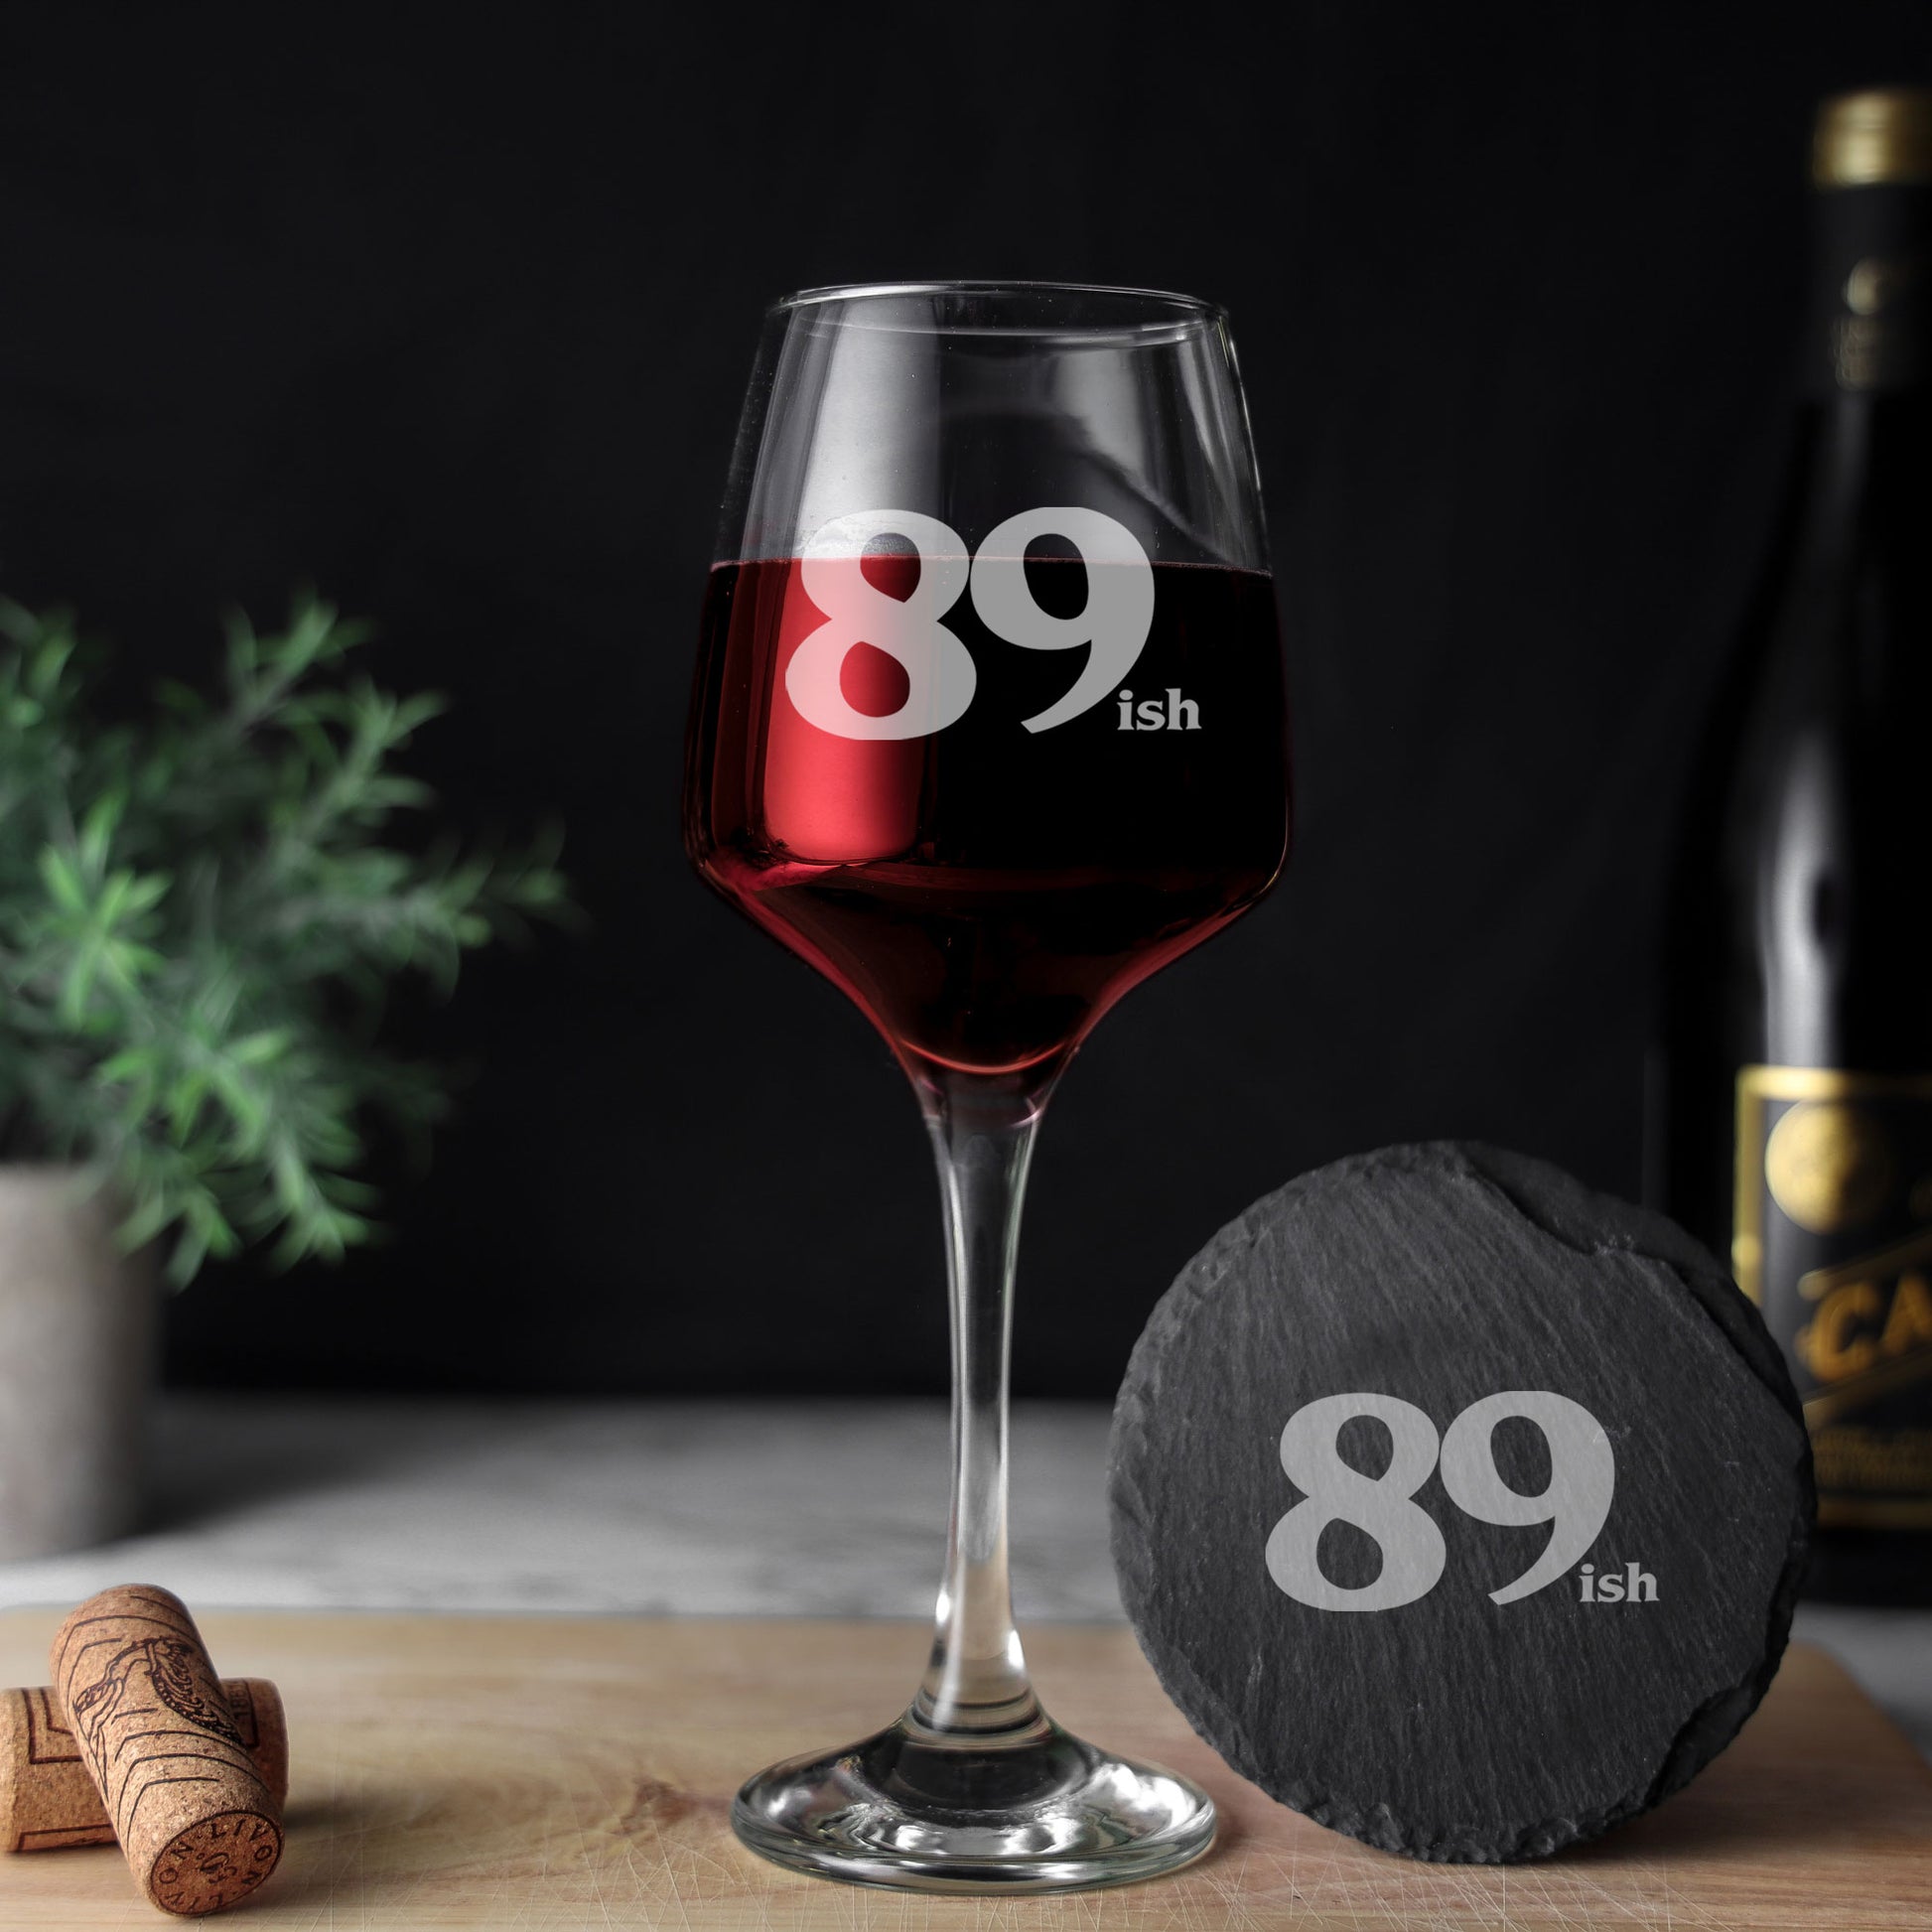 89ish Wine Glass and/or Coaster Set  - Always Looking Good - Glass & Round Coaster Set  